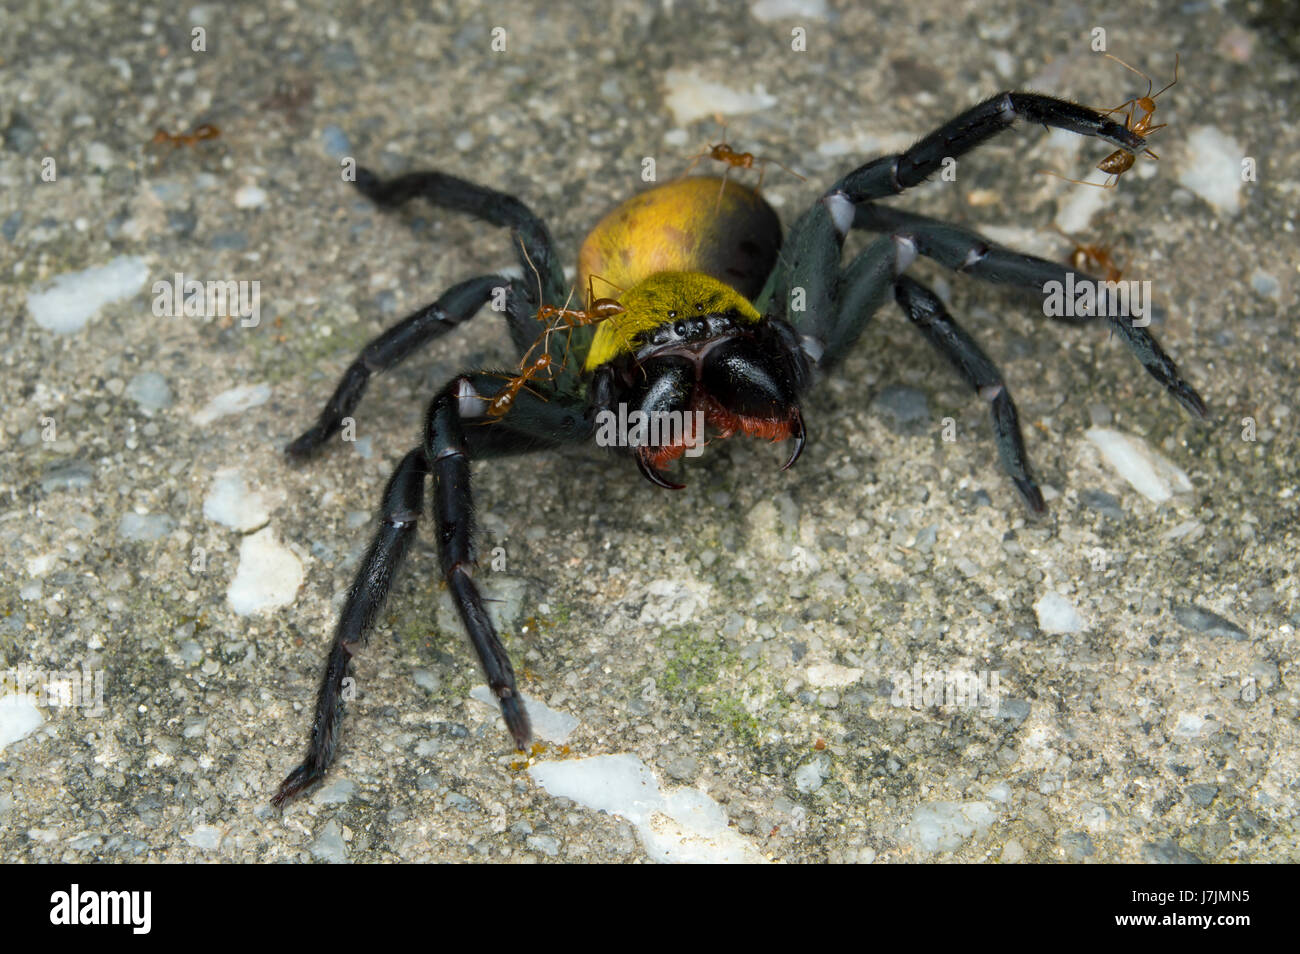 Black and gold huntsman.tube dwelling spider. Spider making threat posed. Stock Photo